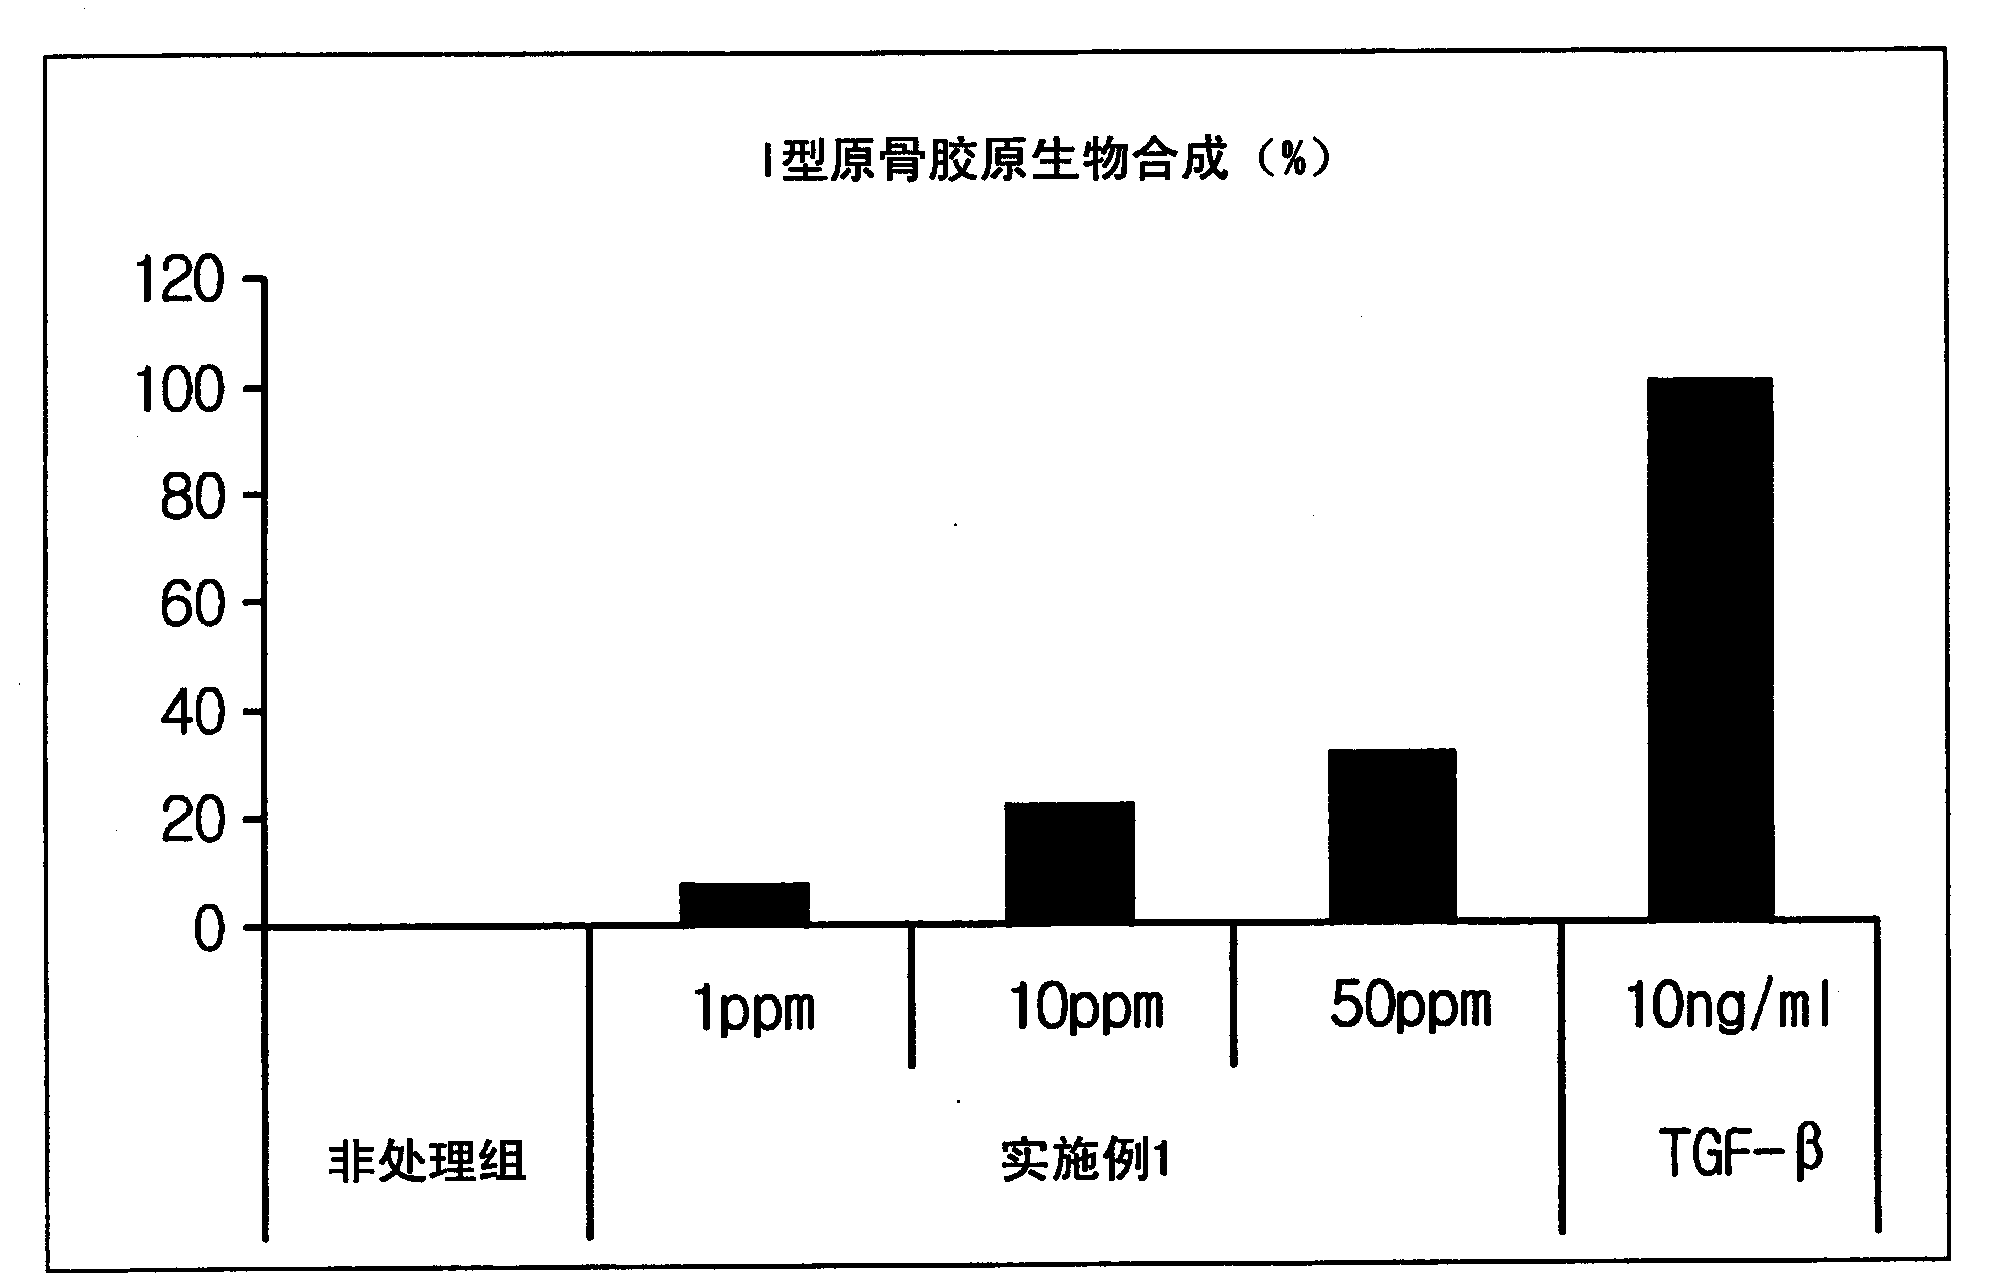 External preparation composition for skin comprising ginseng flower or ginseng seed extracts